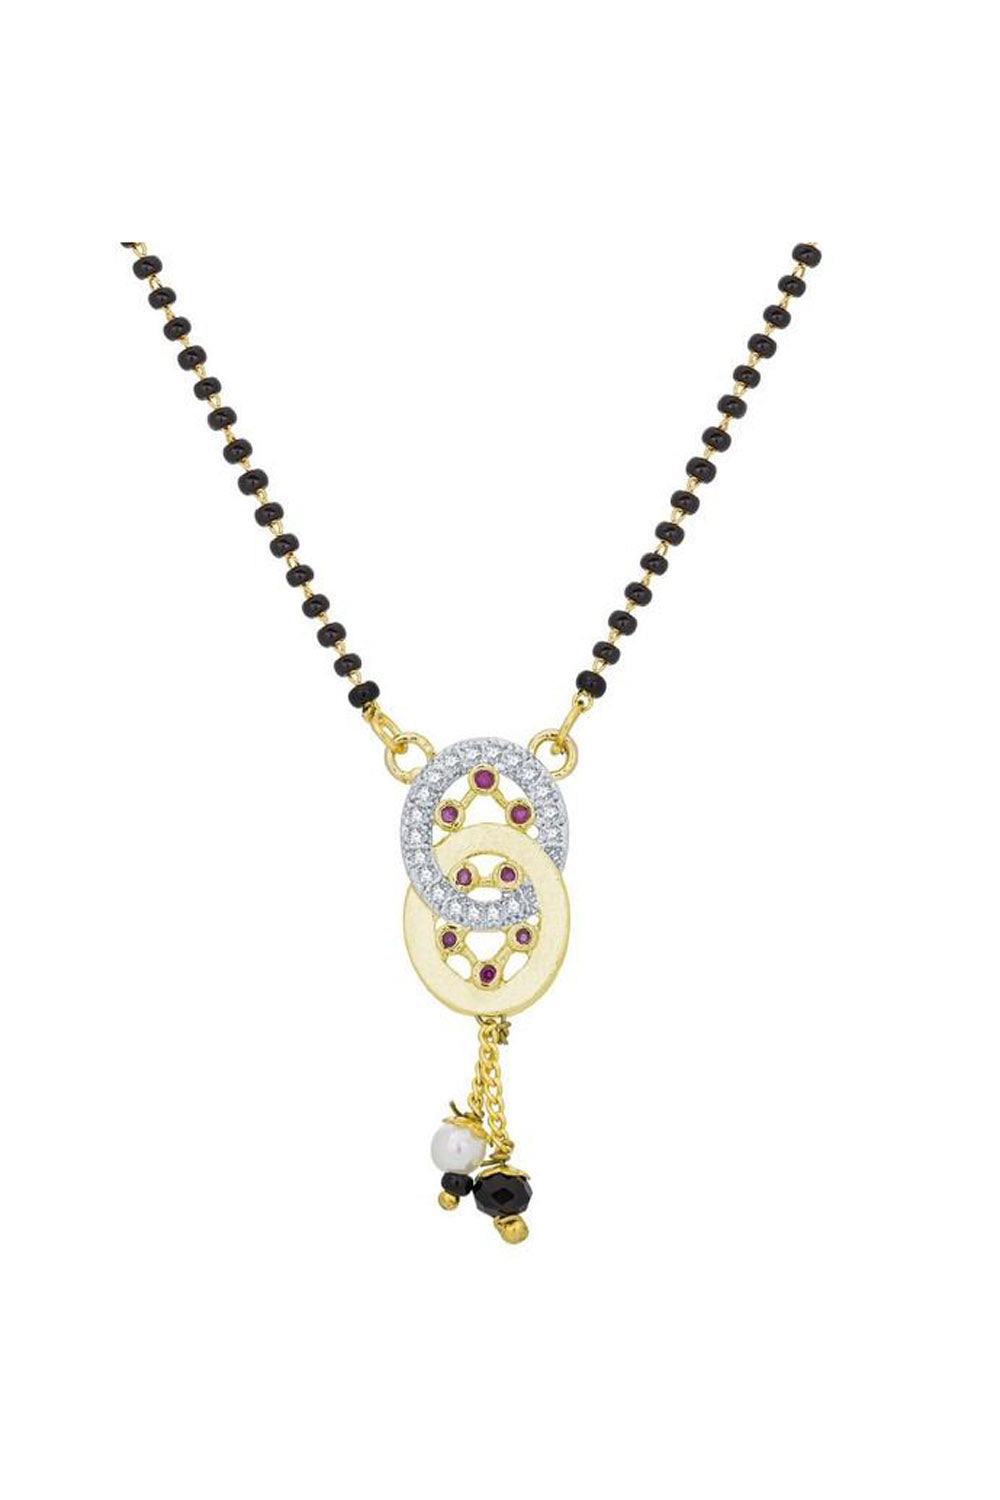 Women's Alloy Mangalsutra in Black, Gold and White